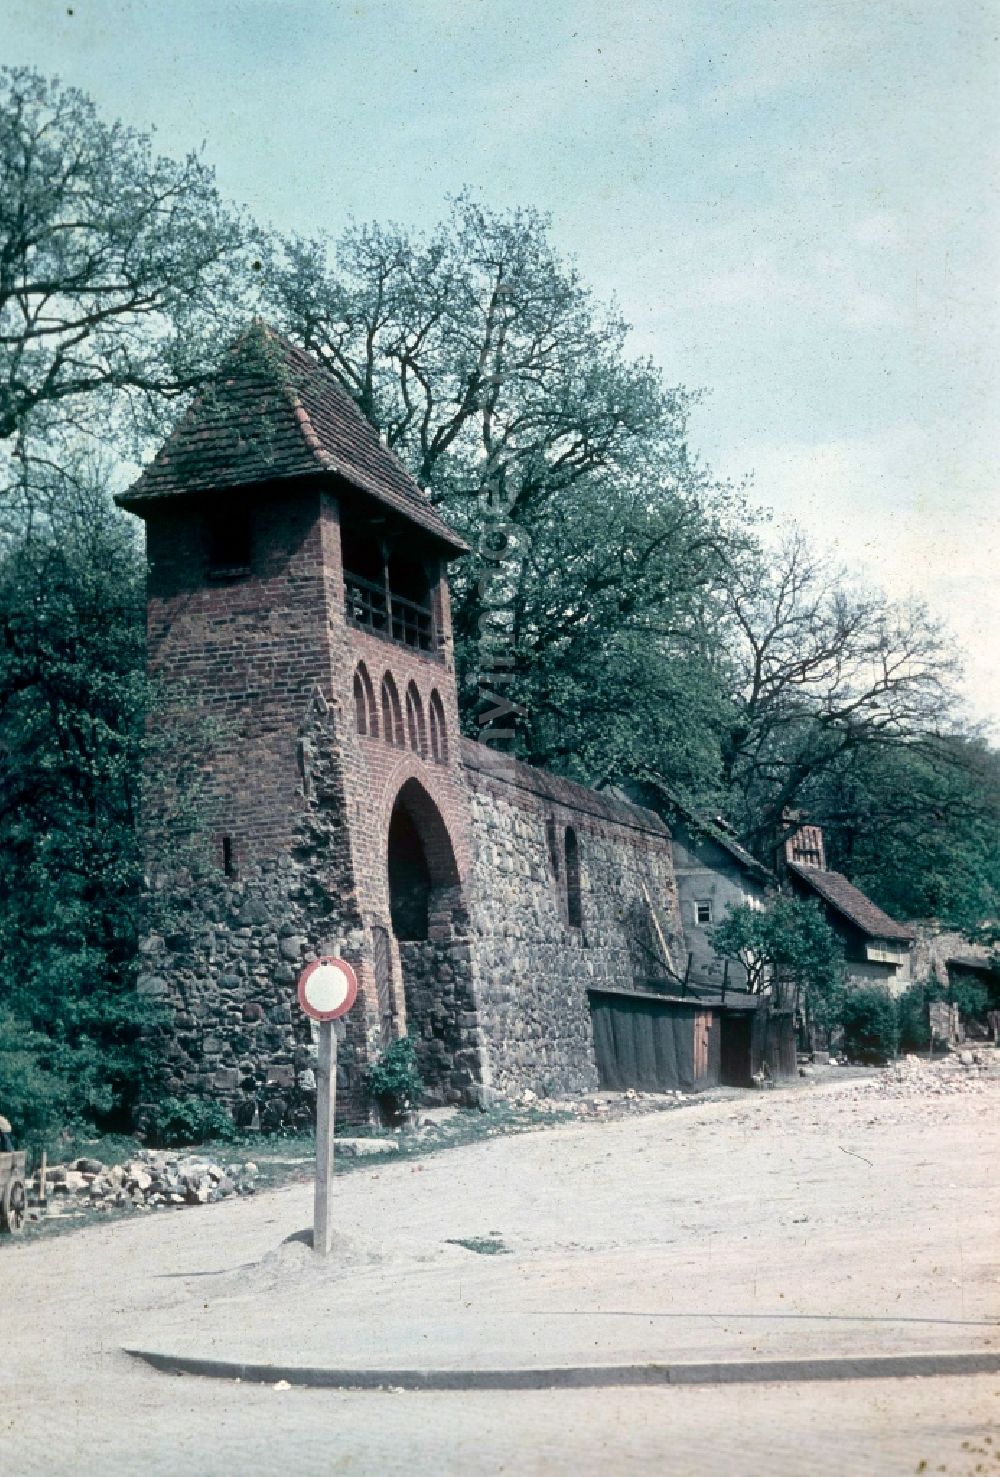 Neubrandenburg: Observation tower in the city wall of Neubrandenburg in the state of Mecklenburg-Vorpommern in the territory of the former GDR, German Democratic Republic